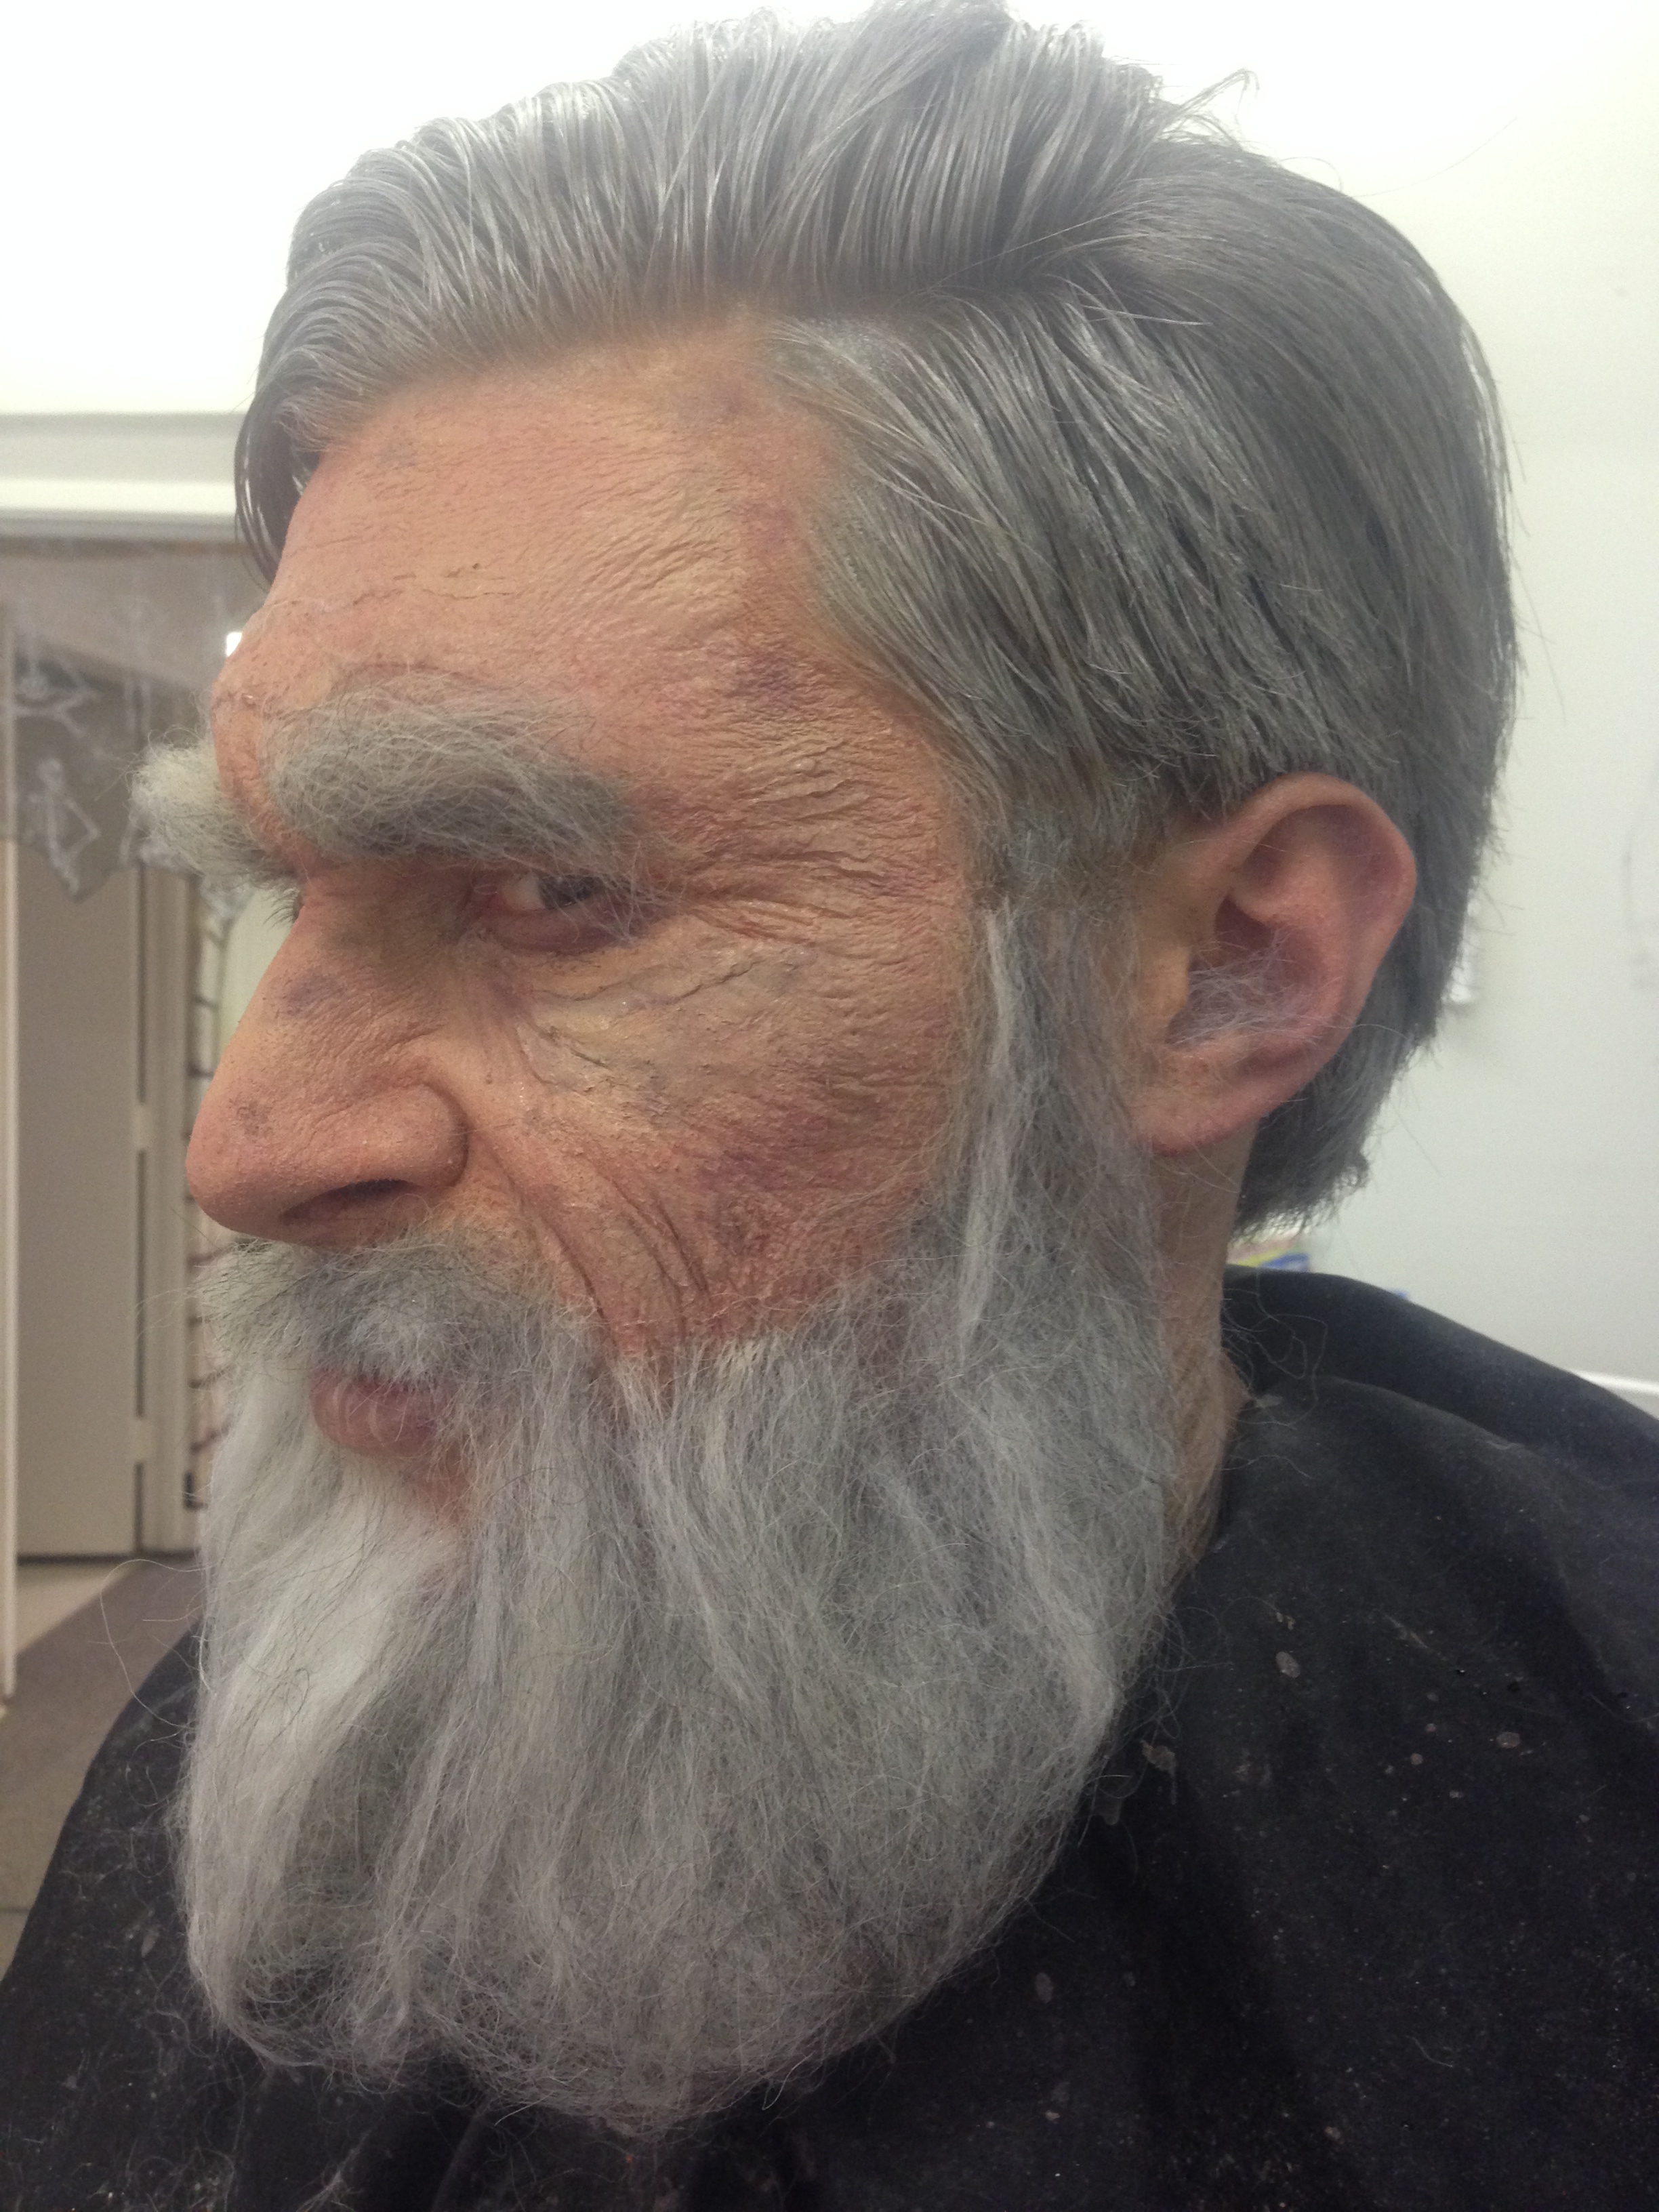 NHL Avalanche Defenseman Erik Johnson made up to look like an old man for Halloween 2013 by Midian Crosby of Monster Makeup FX.